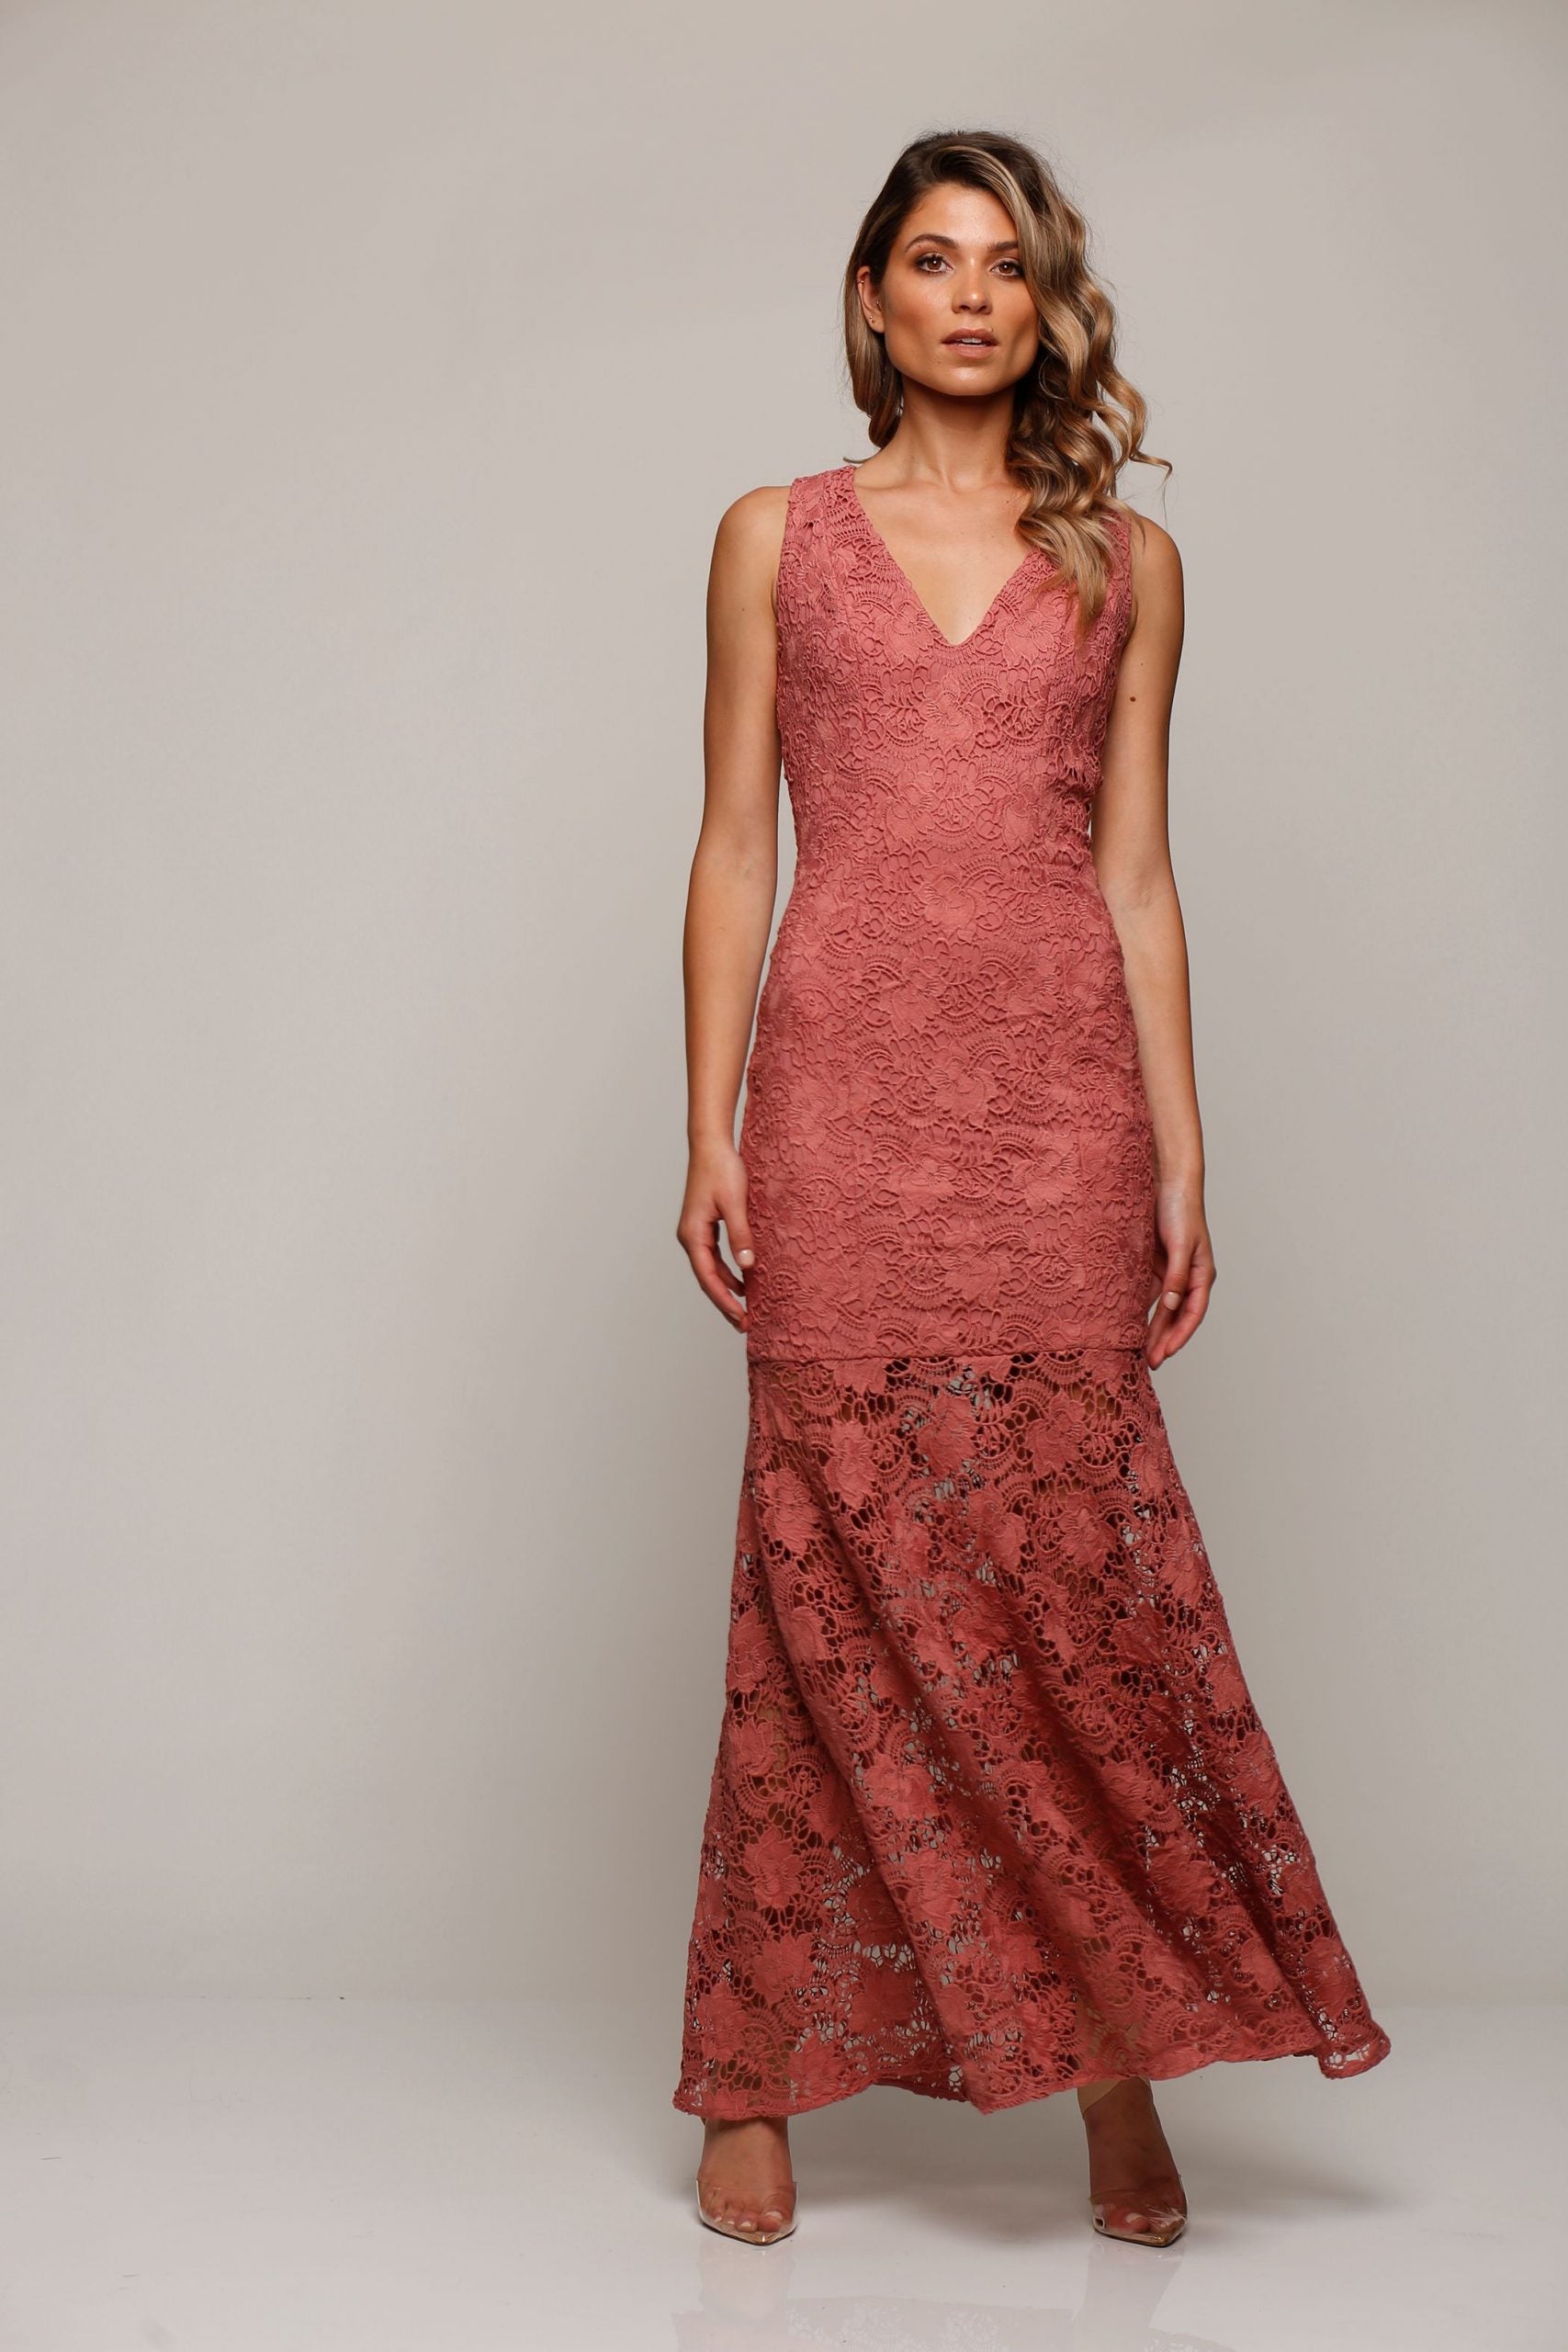 RM202012 Passion Maxi/ Rose Pink